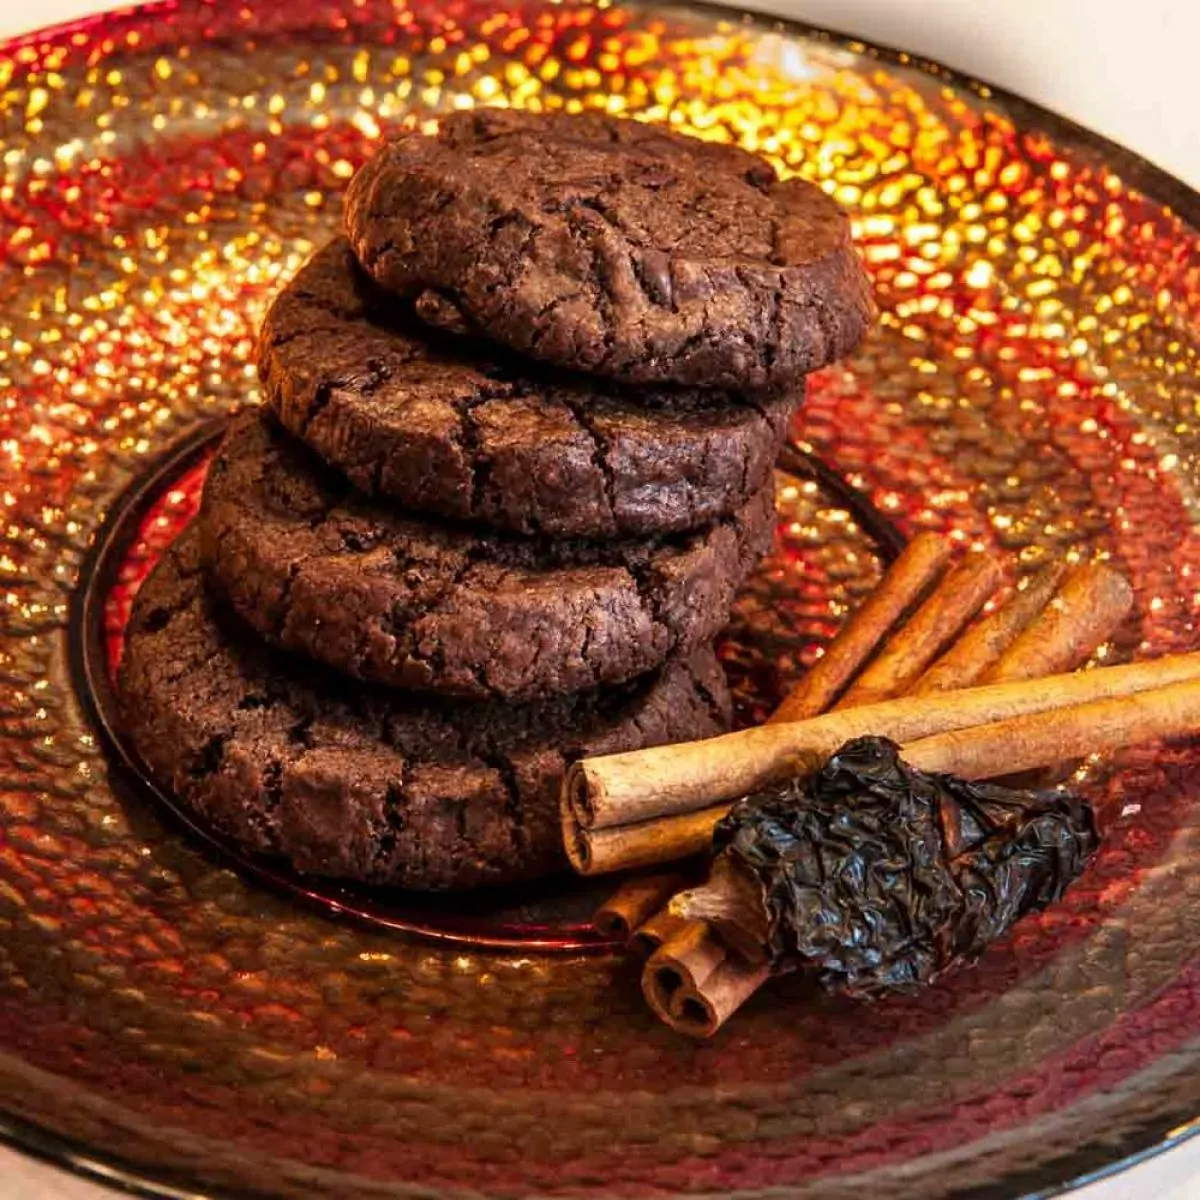 Molé Cookies stacked on decorative plate with cinnamon sticks and chipotle pepper